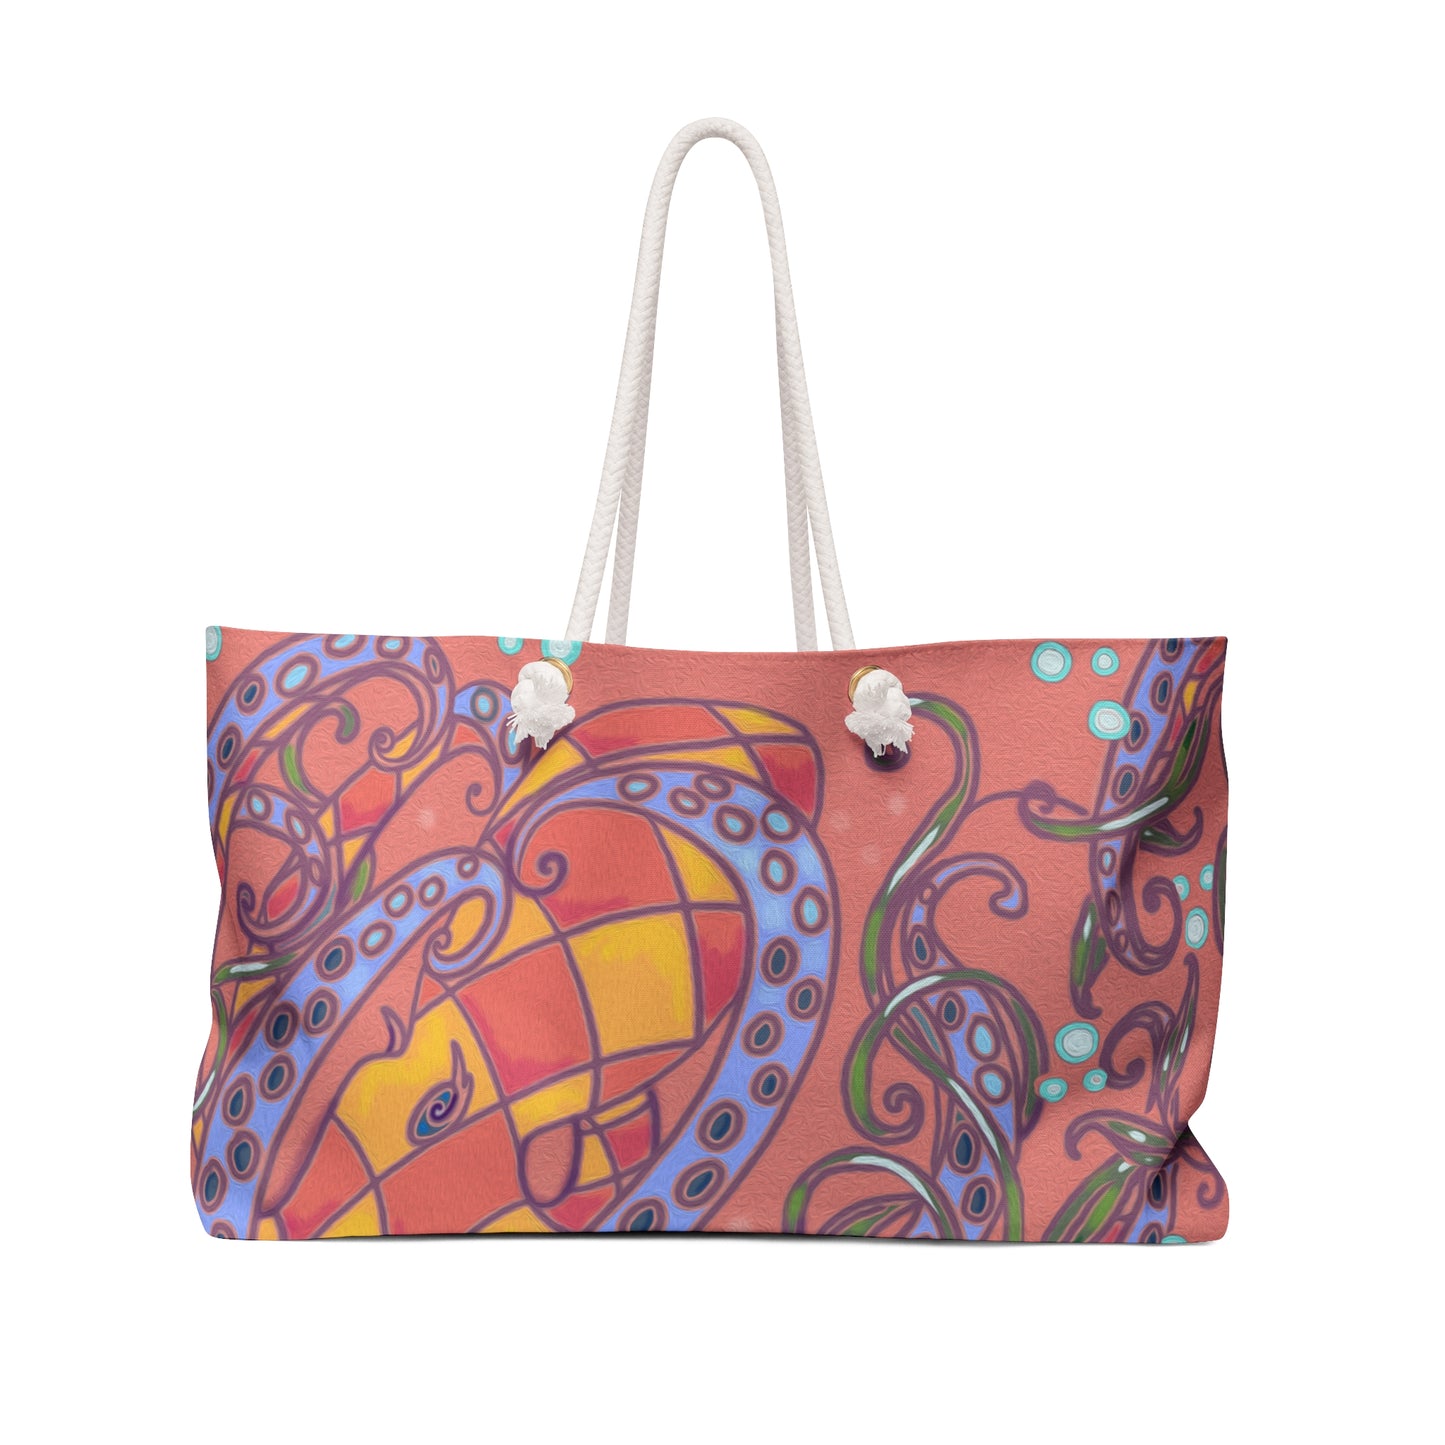 Coral Octopus Weekender Bag from Talula Land